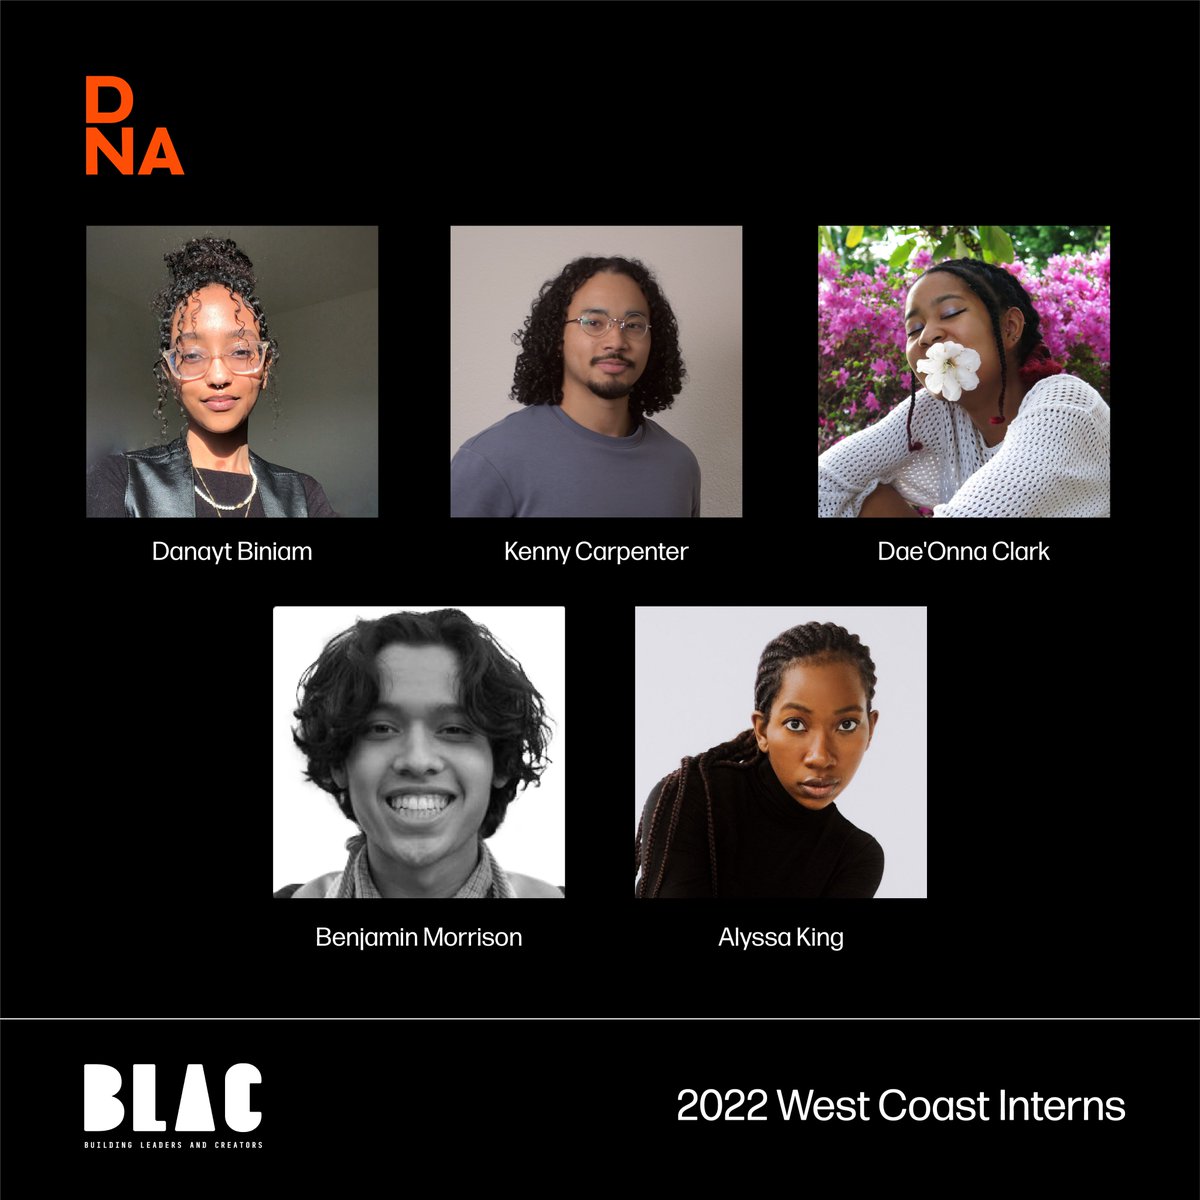 Welcome to the interns working with @dnaseattle: Danayt, Kenny, Dae'Onna, Benjamin, and Alyssa. #BLACinterns